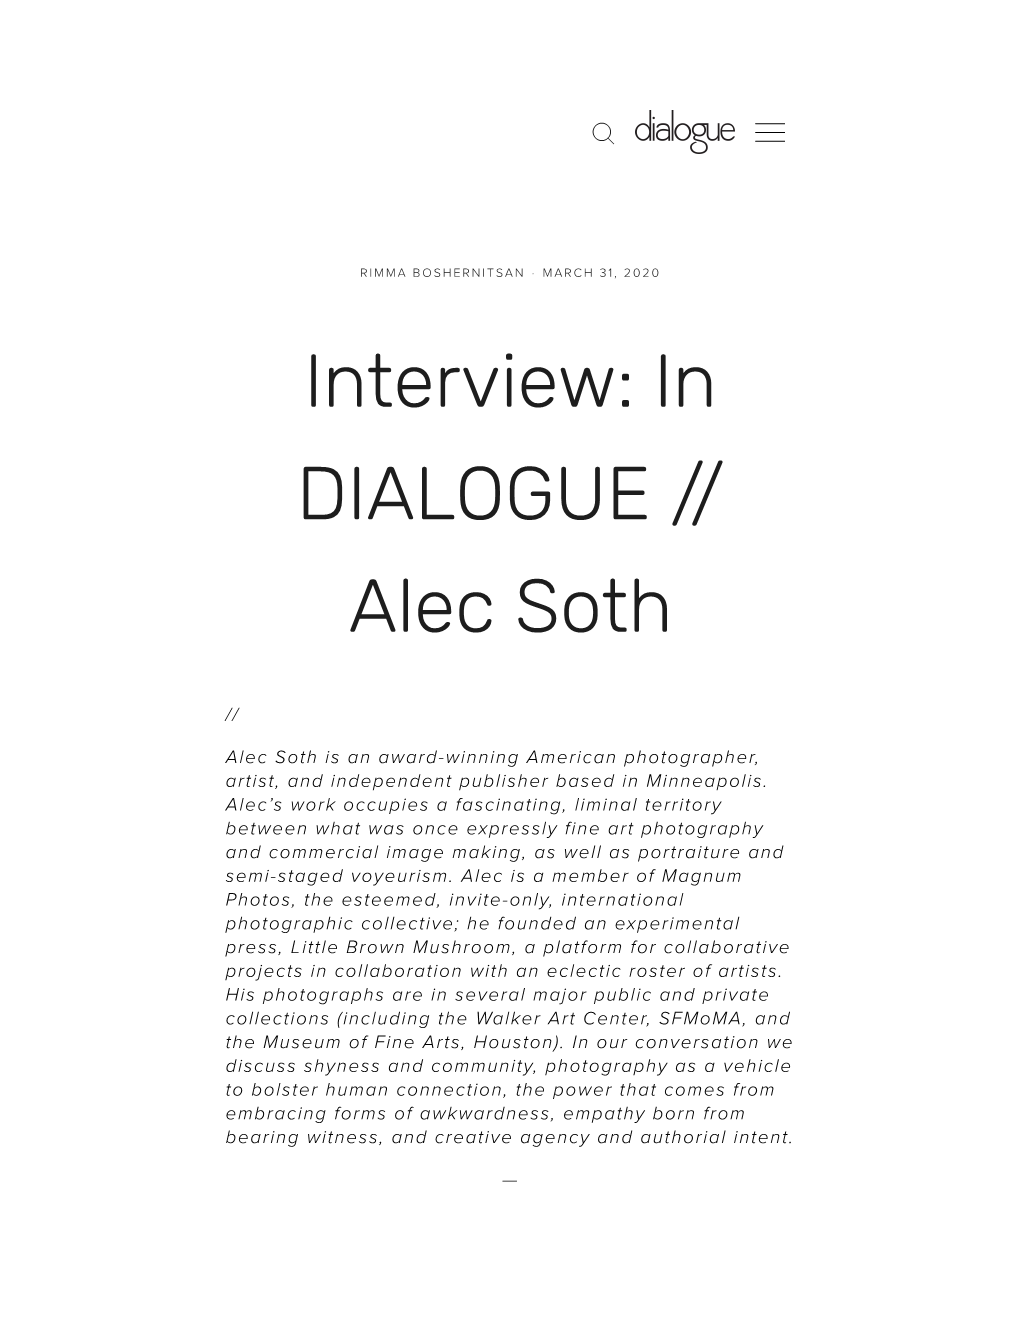 In Dialogue with Alec Soth